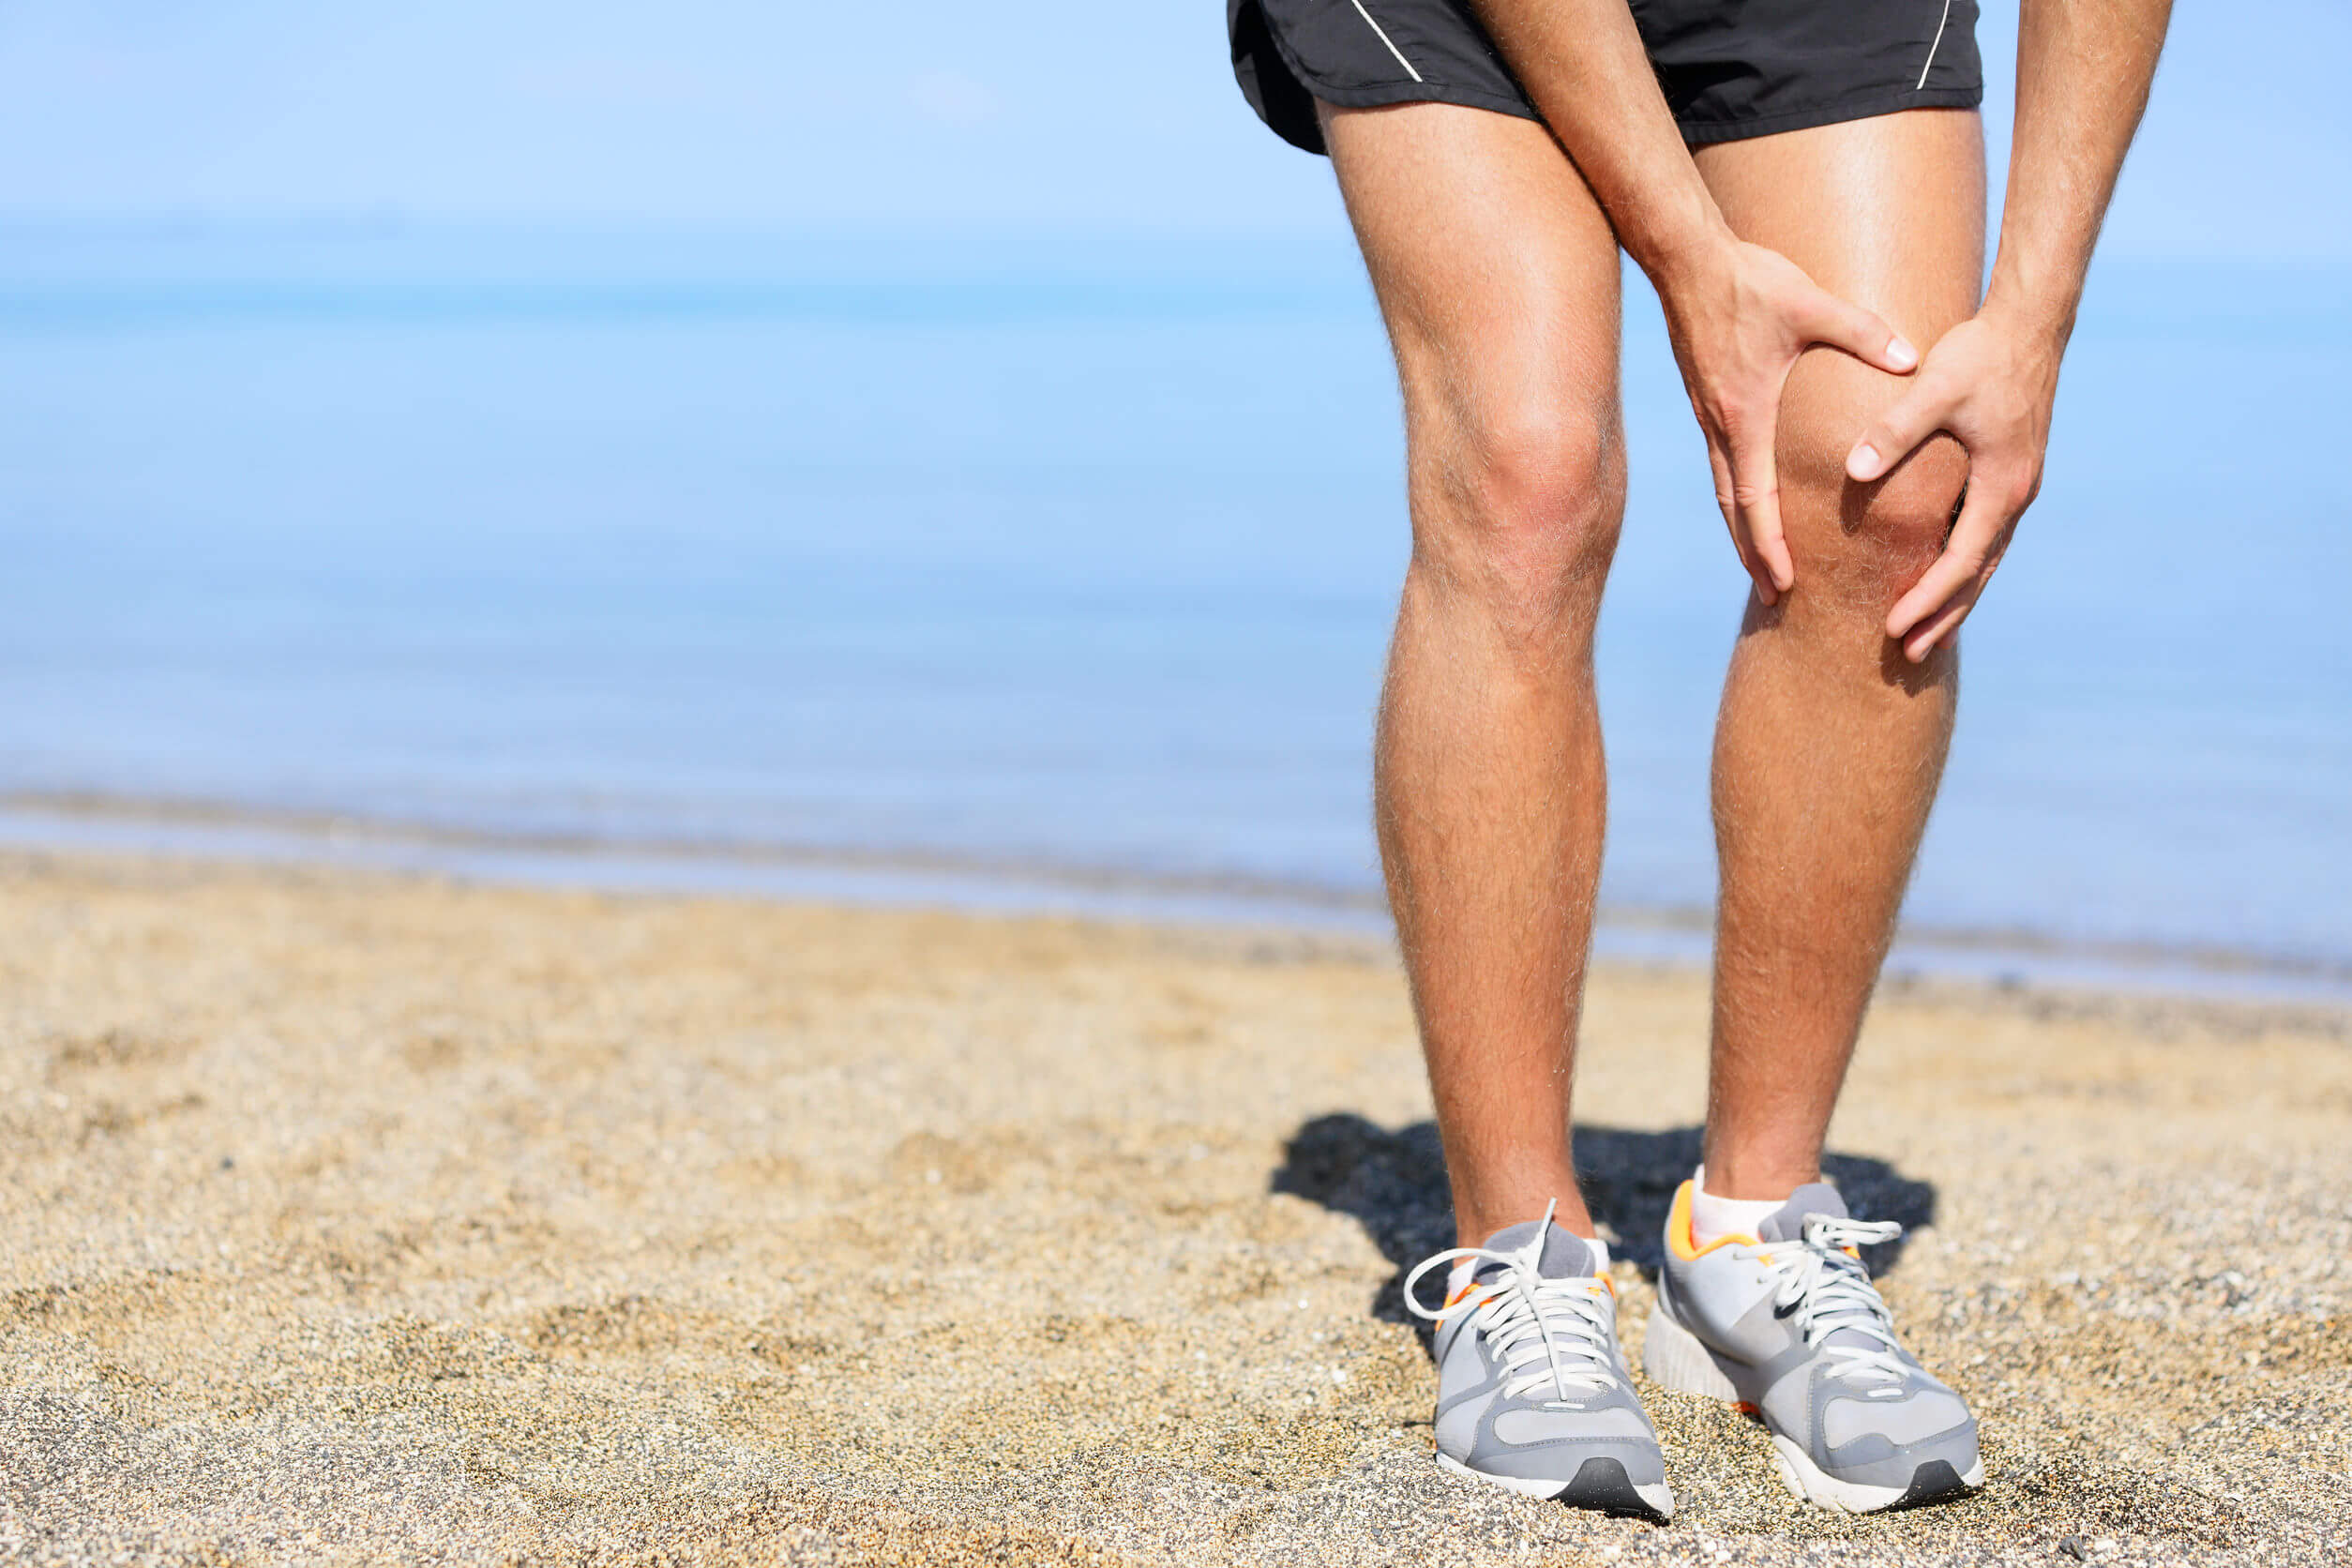 running injury - man jogging with knee pain. close-up view of runner injured jogging on the beach clutching his knee in pain. male fitness athlete.